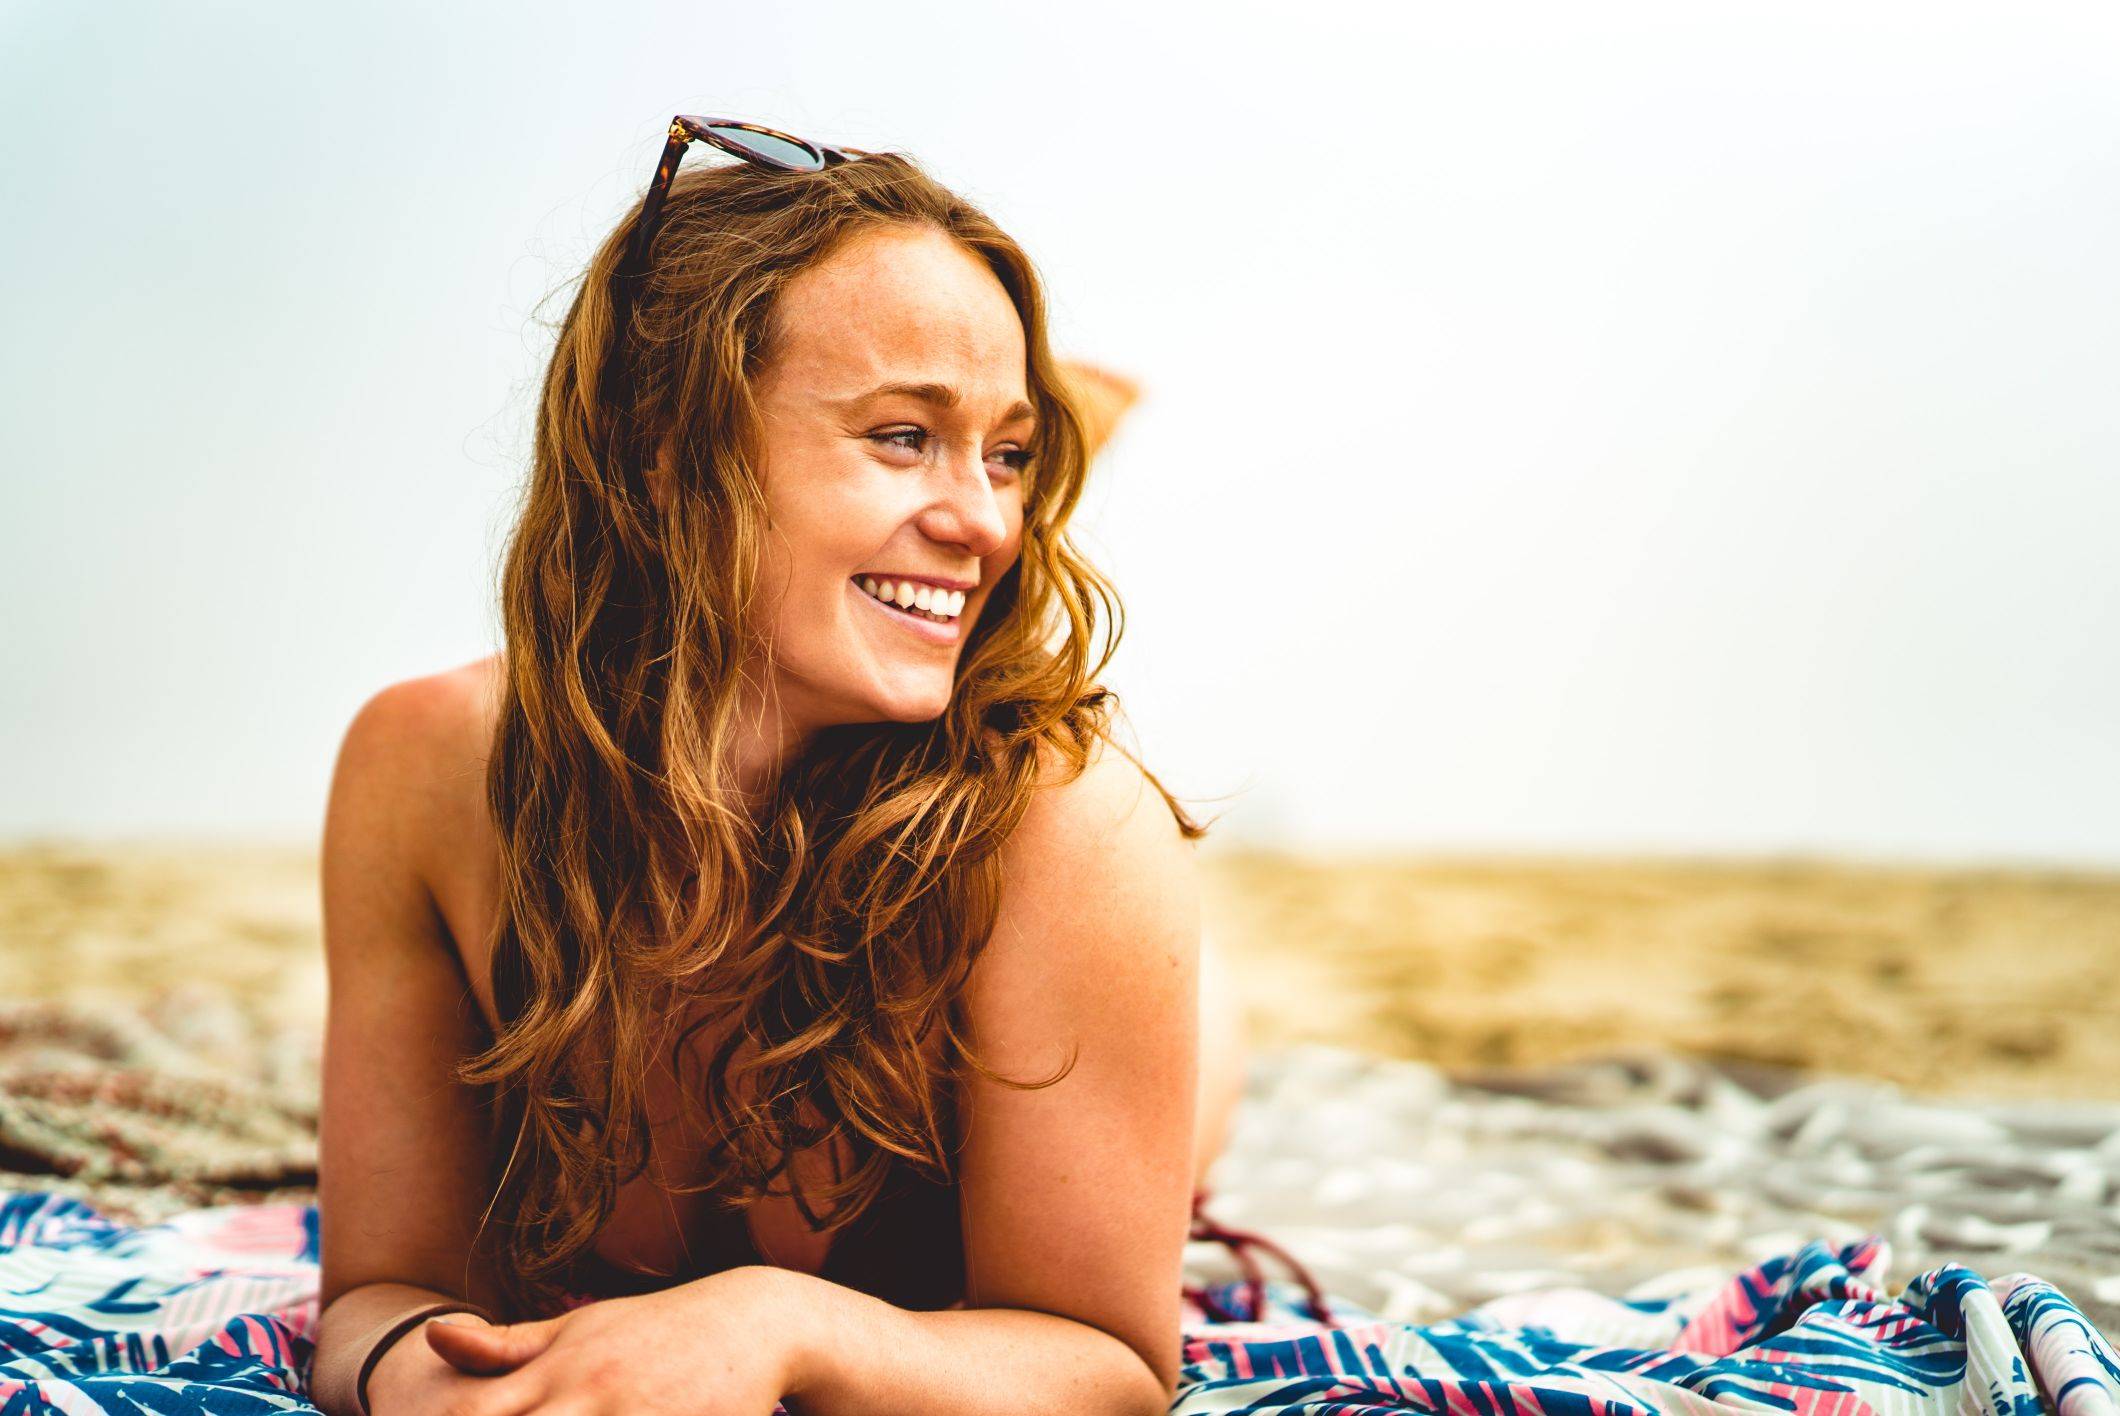 Image of a happy woman with a wavy hair